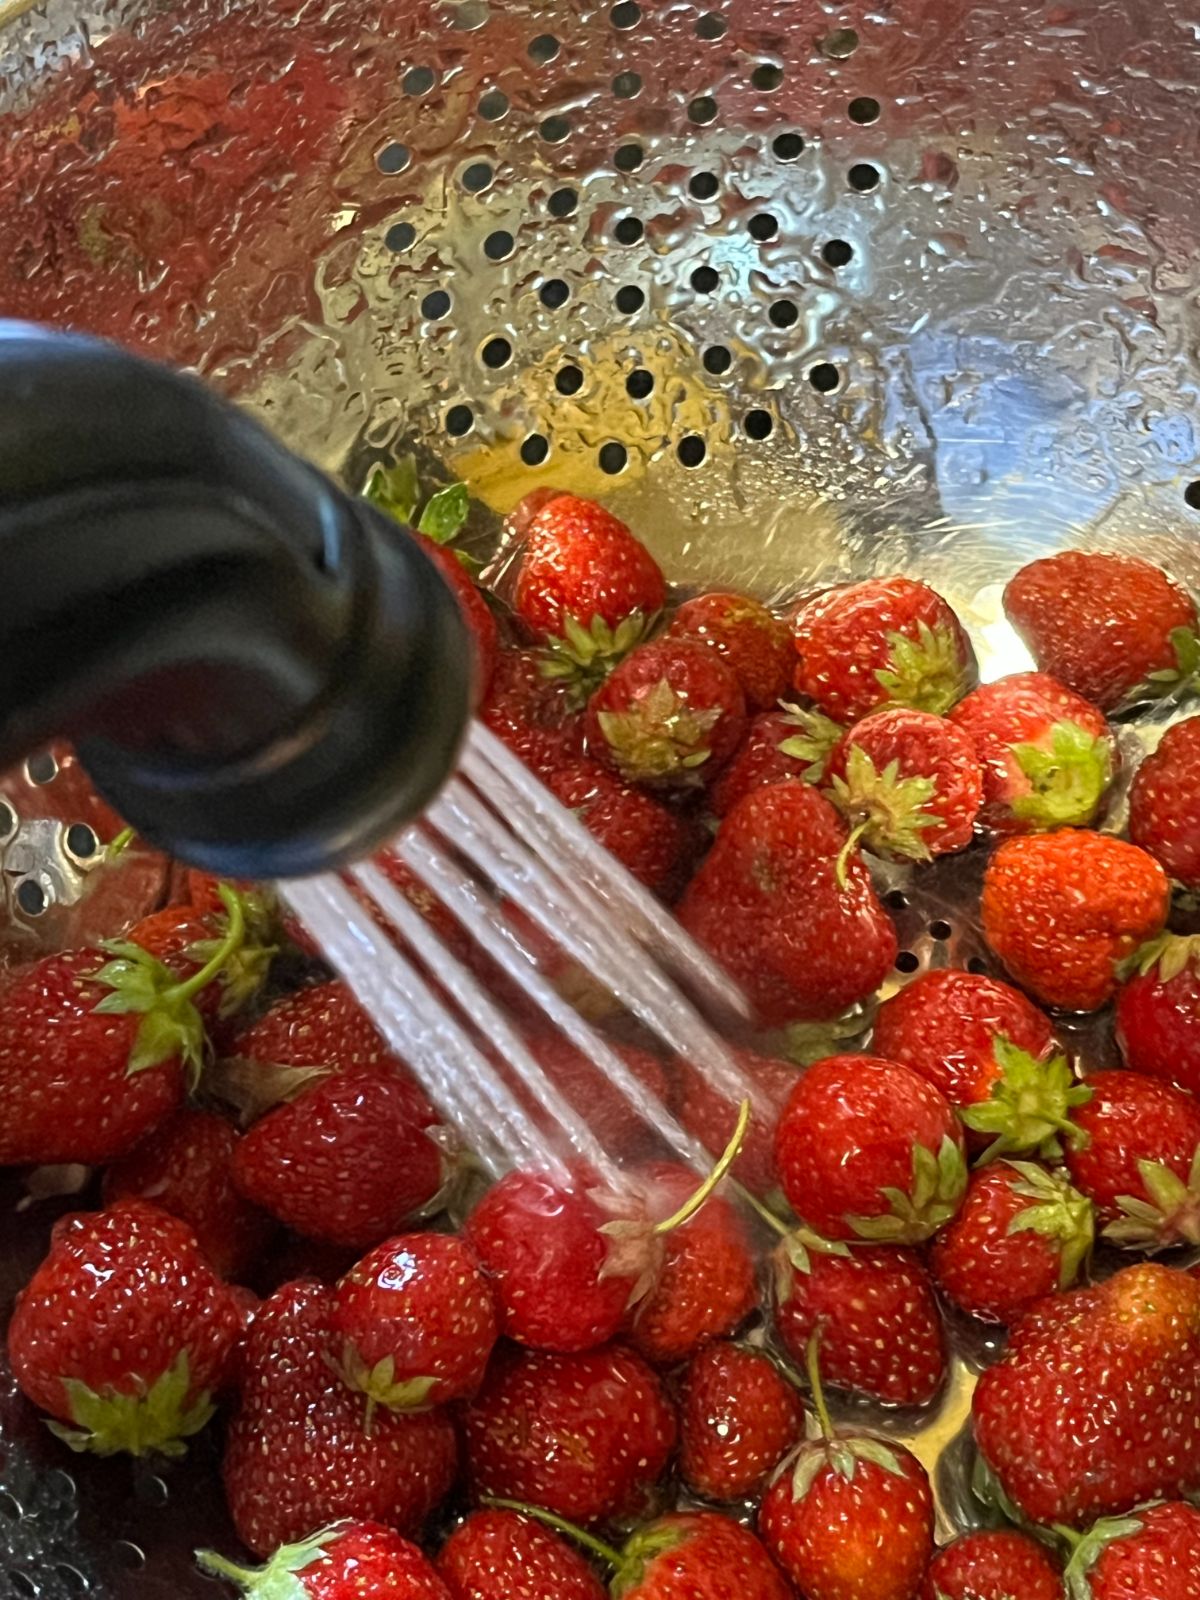 Strawberries being washed with a kitchen sprayer